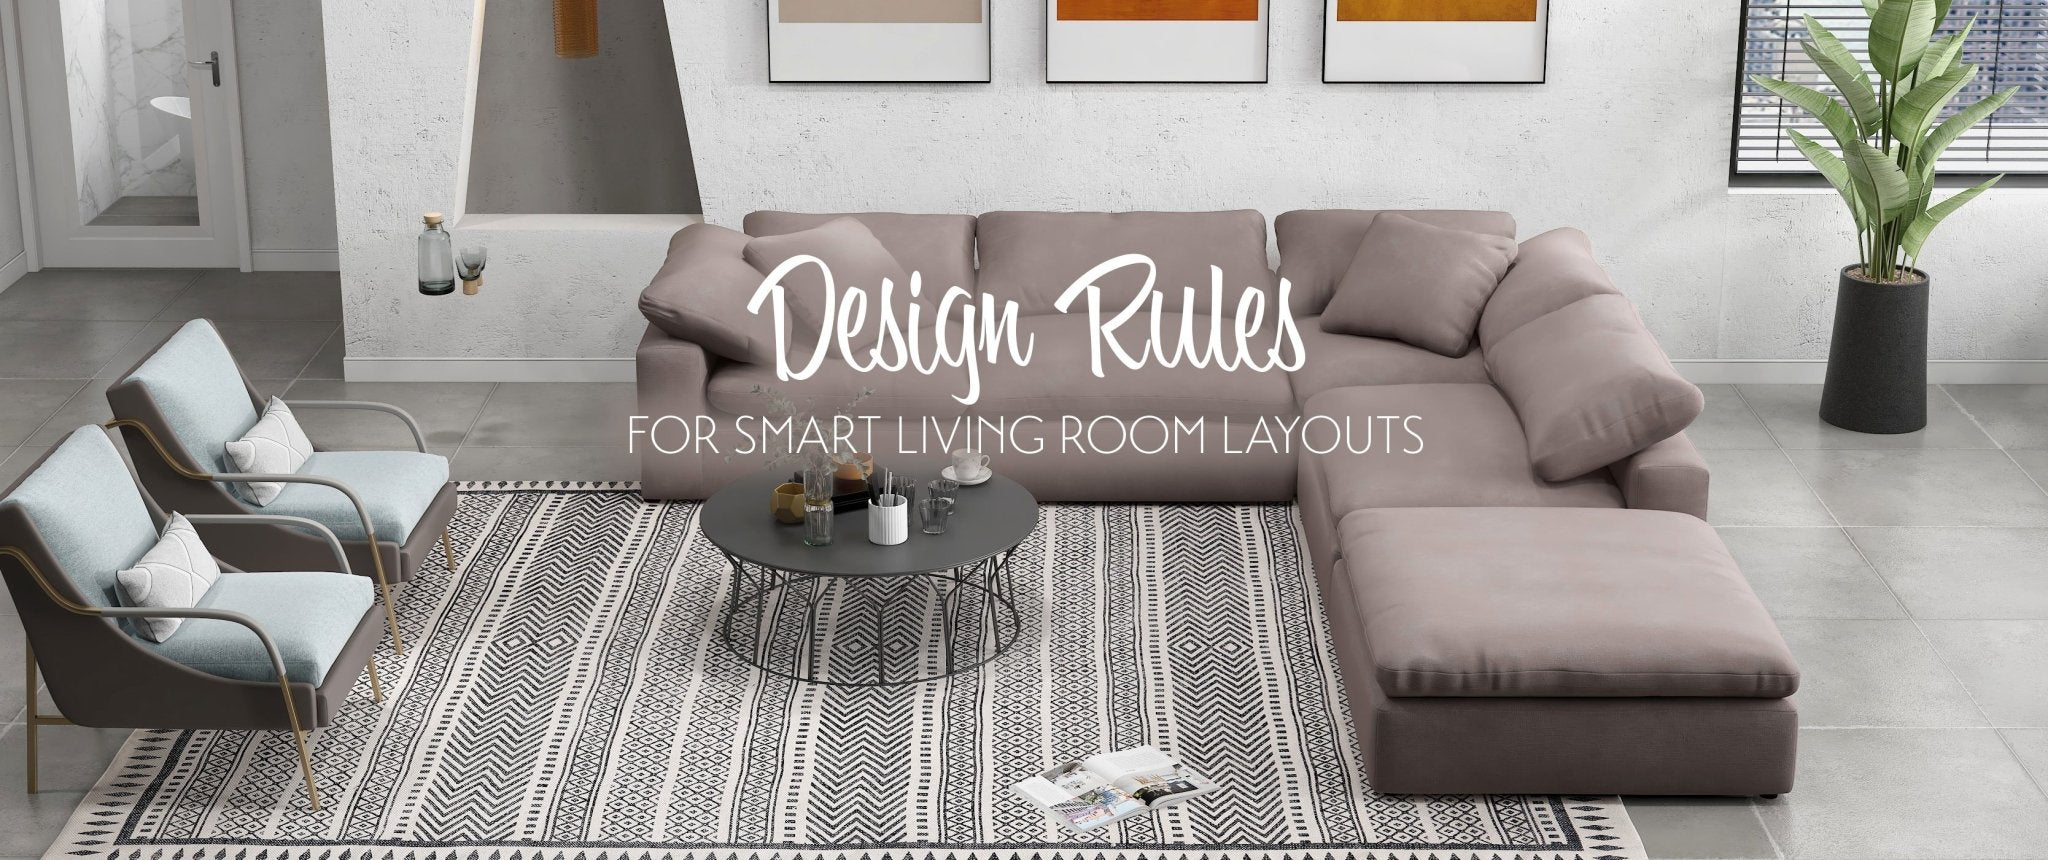 10 smart living room sofa ideas – design rules for sofa/couch